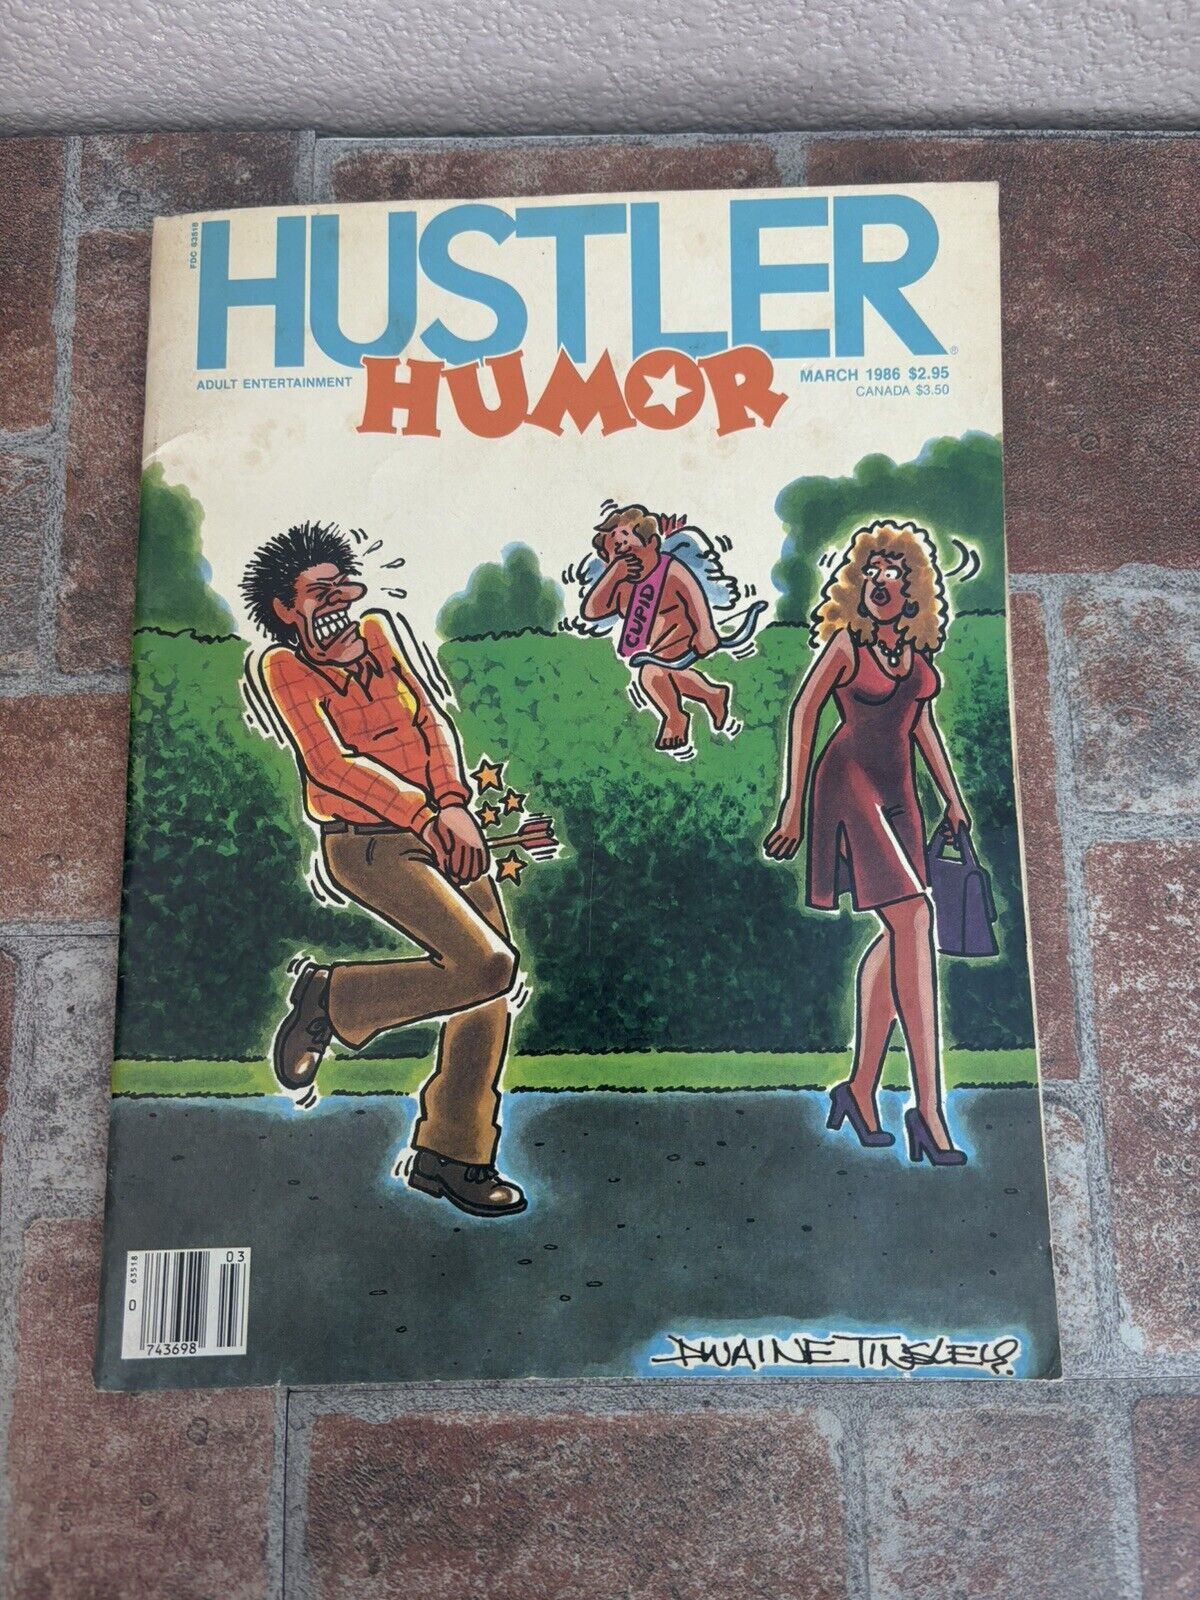 HUSTLER Humor Adult Entertainment March 1986 by Larry Flint